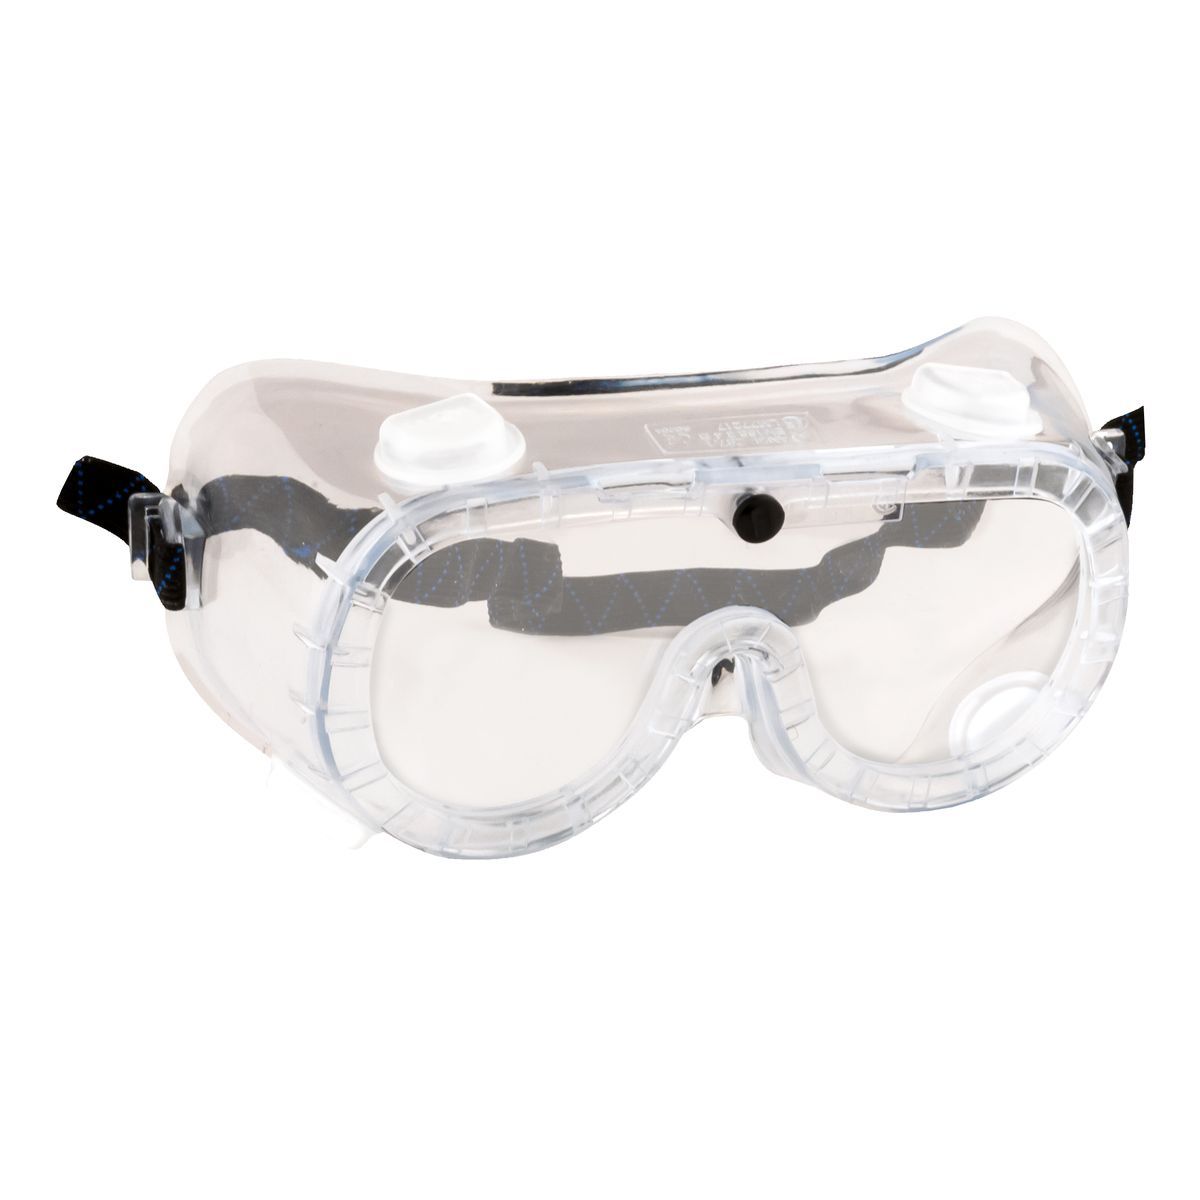 Style PW21 Indirect Vent Goggles EN166-1